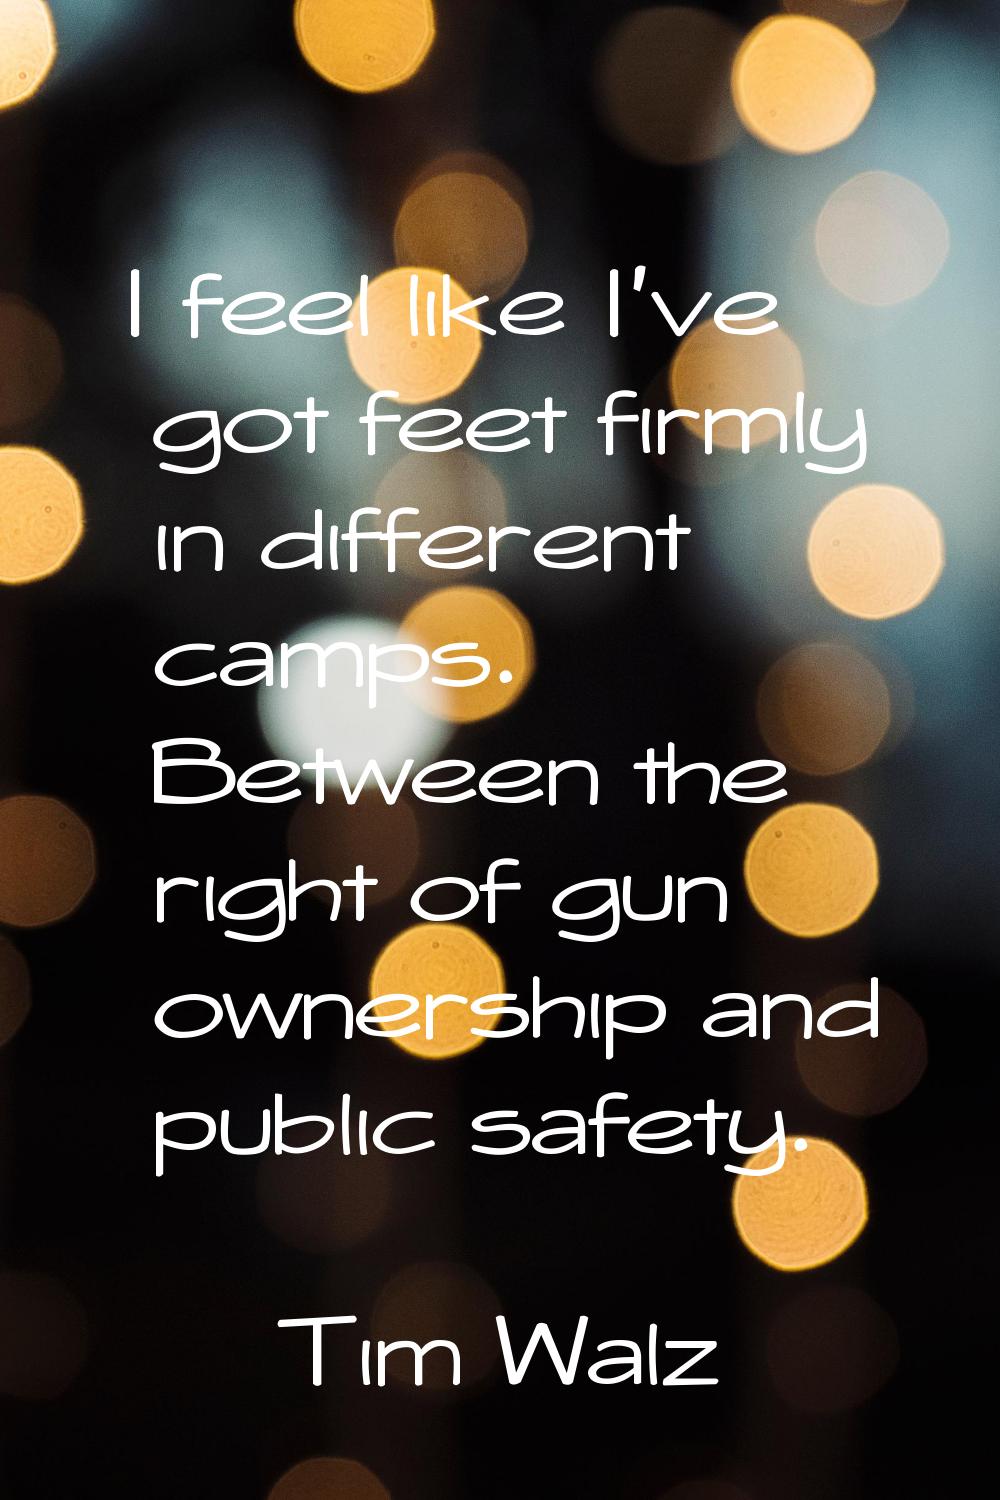 I feel like I've got feet firmly in different camps. Between the right of gun ownership and public 